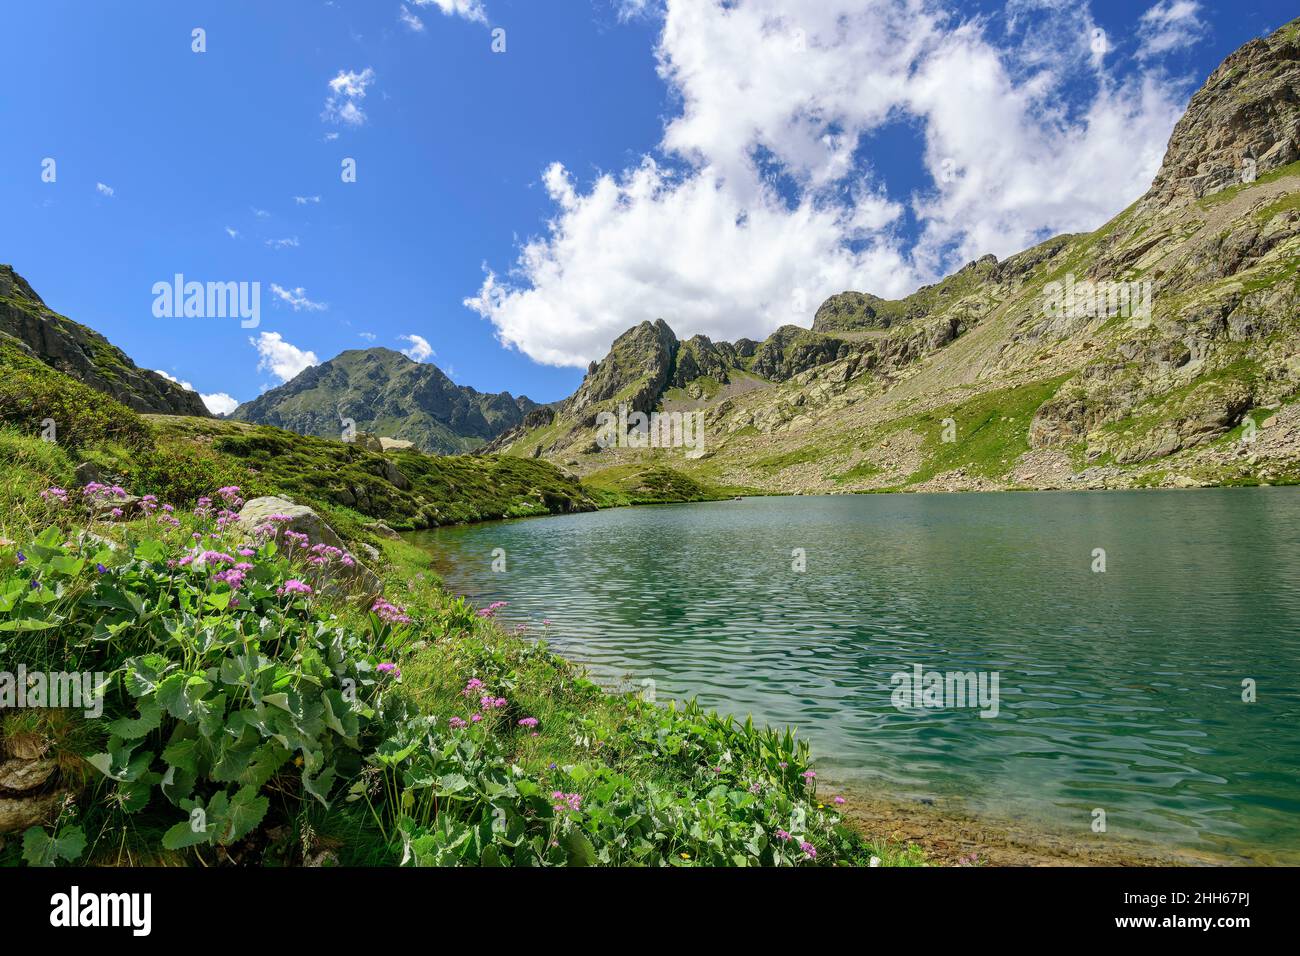 Lac Autier See am Valley of Wonders im Nationalpark Mercantour, Frankreich Stockfoto